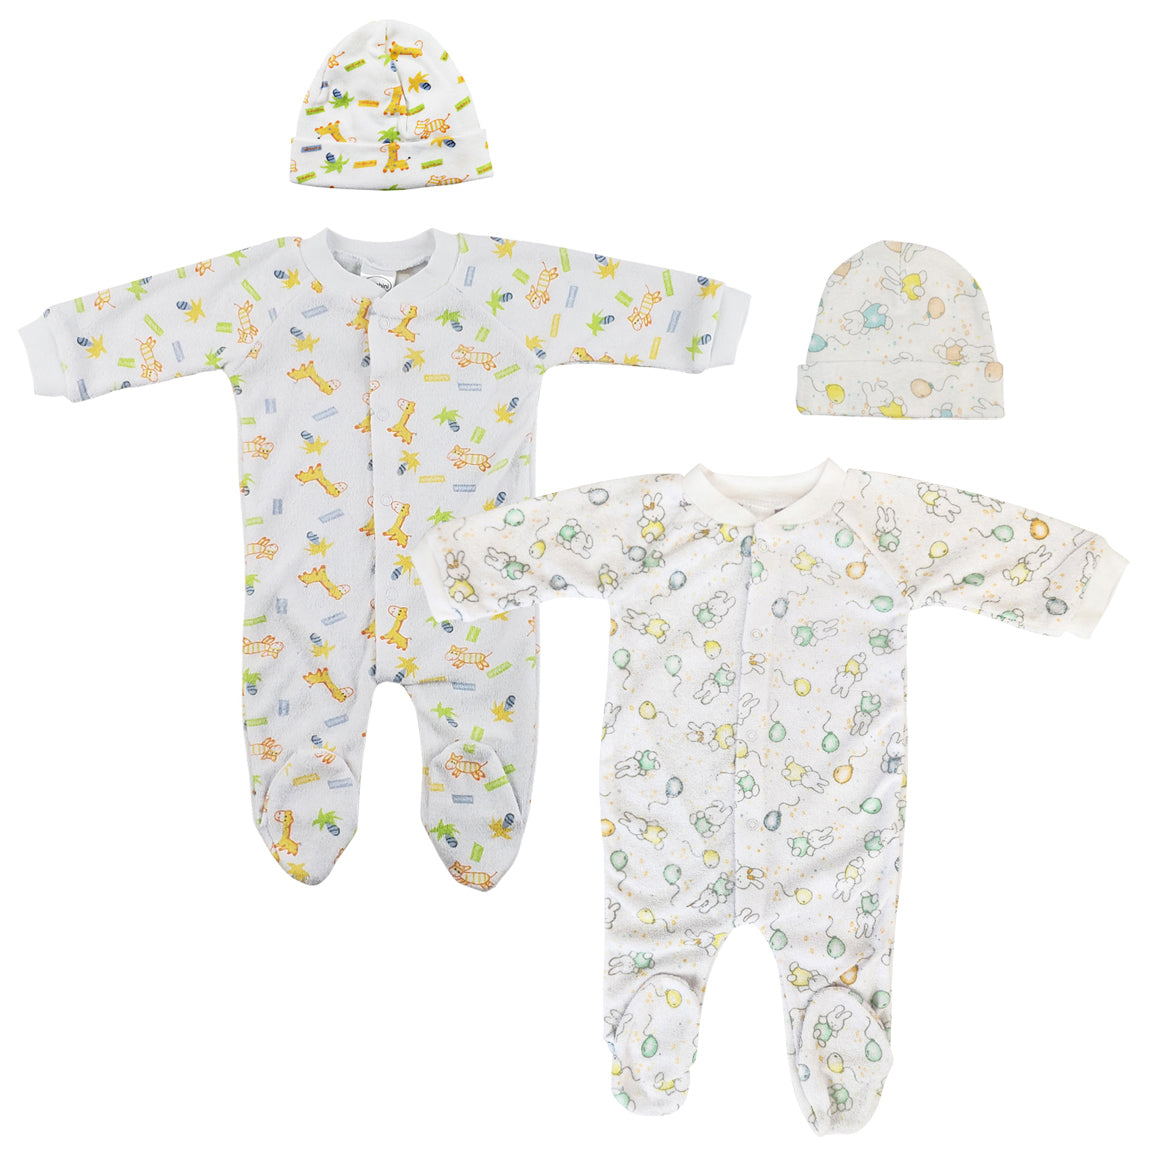 Unisex Closed-toe Sleep & Play with Caps (Pack of 4 ) NC_0708